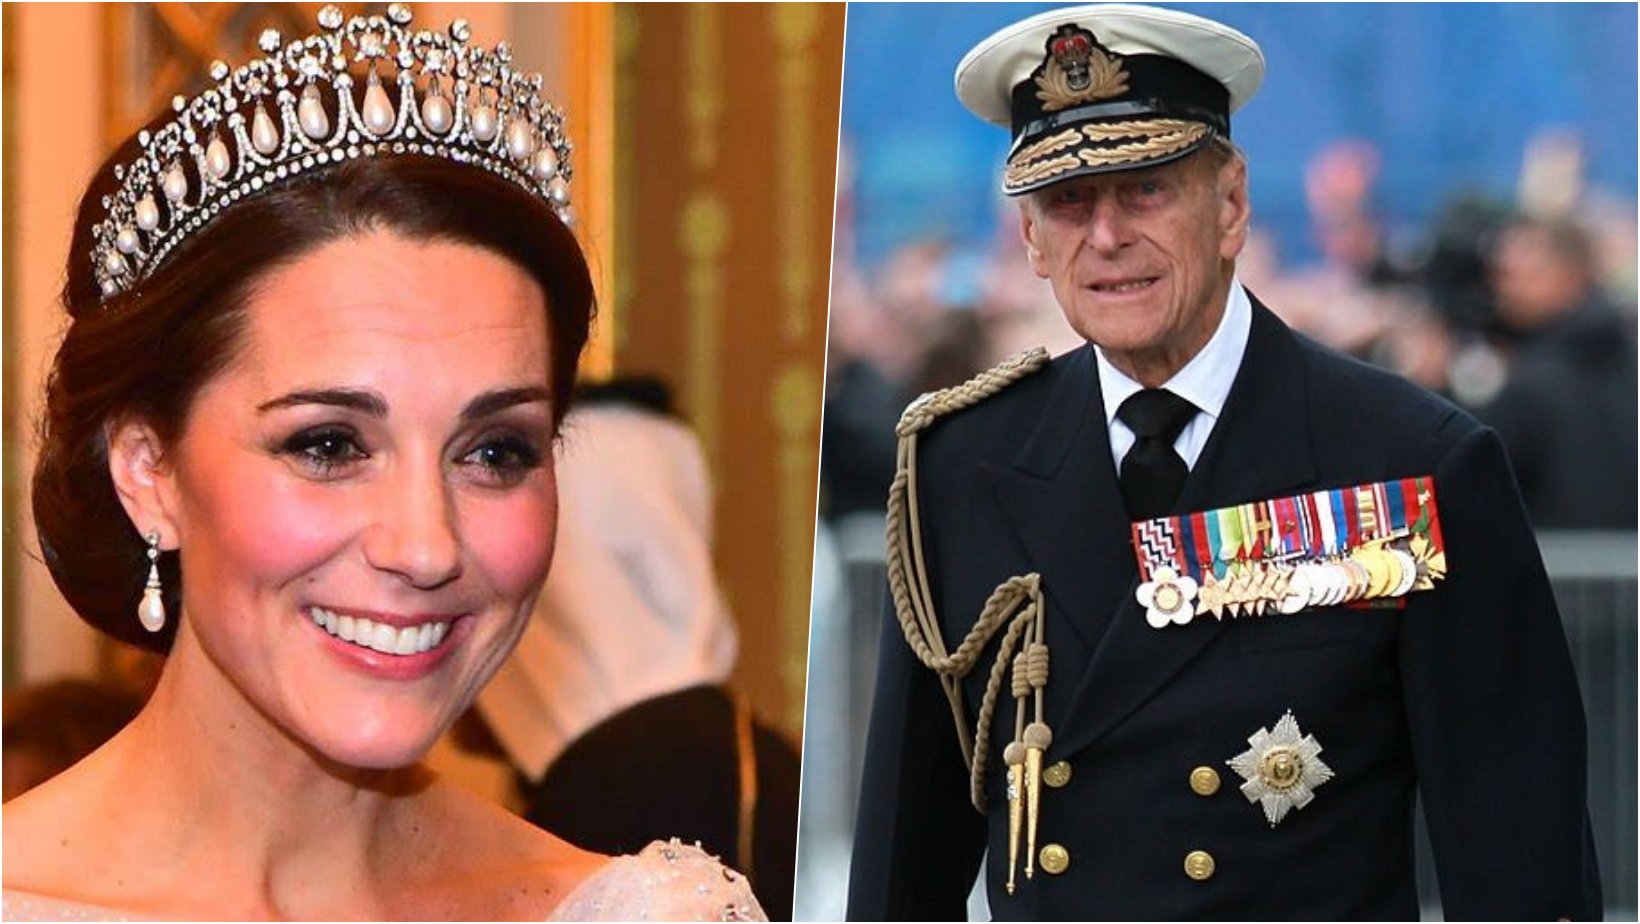 6 facebook cover 42.png?resize=1200,630 - Kate Middleton Stepped Up & Took Over Prince Philip's Role As The ‘Glue' That Keeps The Royal Family Together